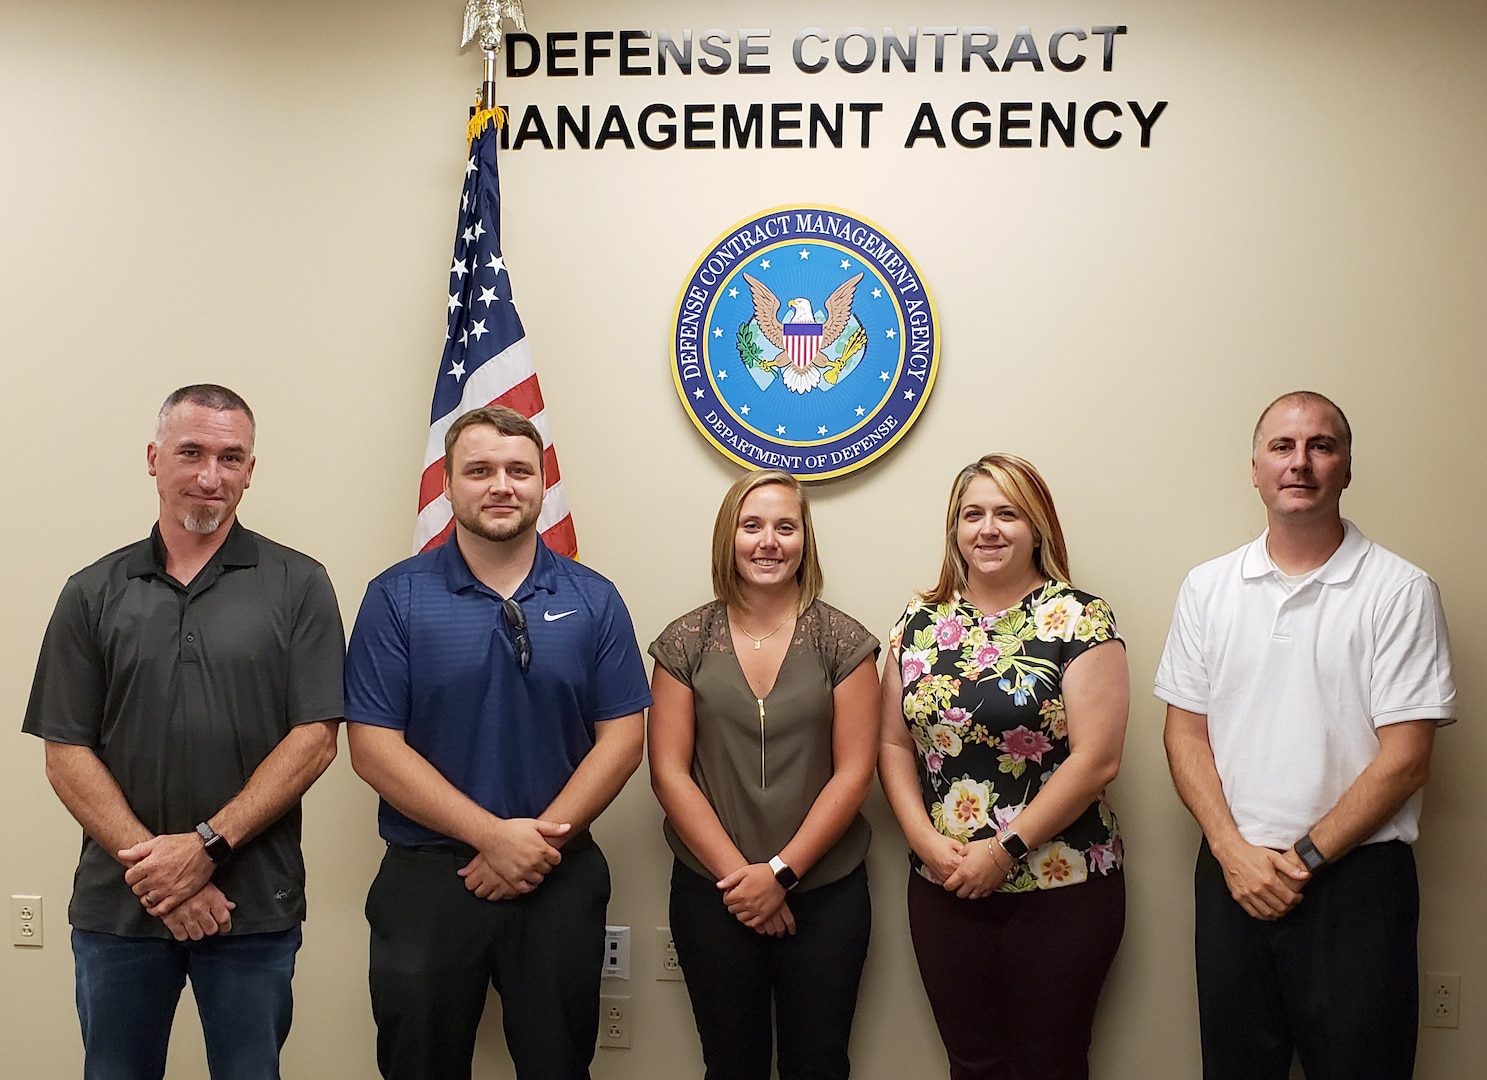 Group photo of male and female employees in front of the American flag and the DCMA seal